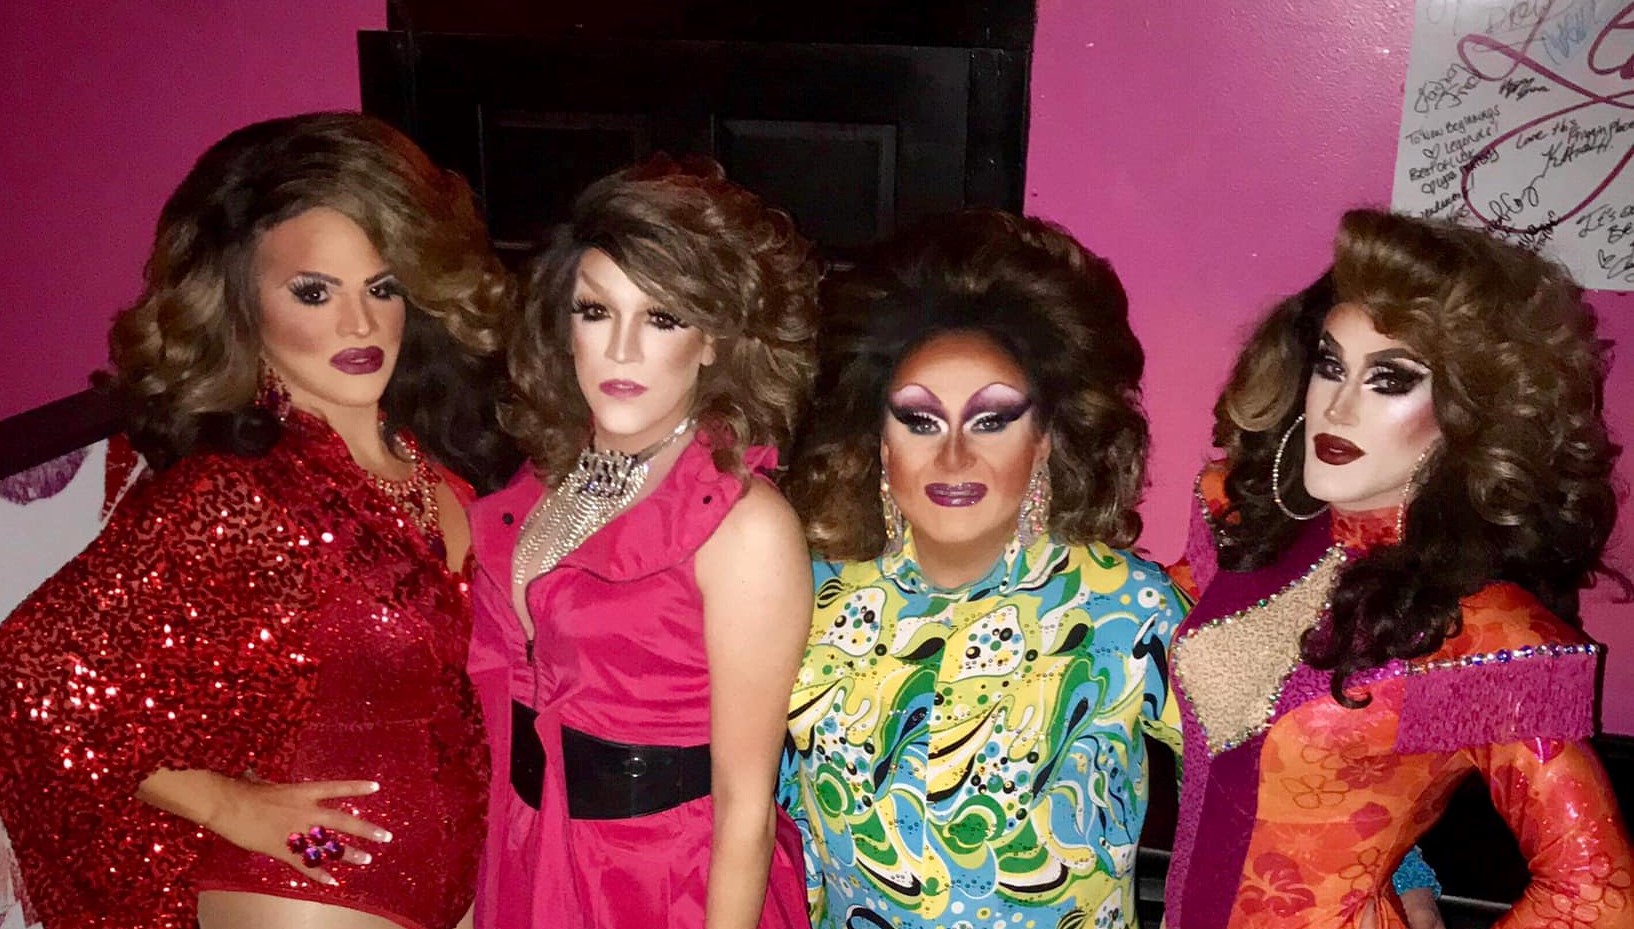 Ava Aurora Foxx, Brook Lockhart, Justyce Sinclaire and Soy Queen | Legends Showclub (Toledo, Ohio) | November 2018 CROPPED